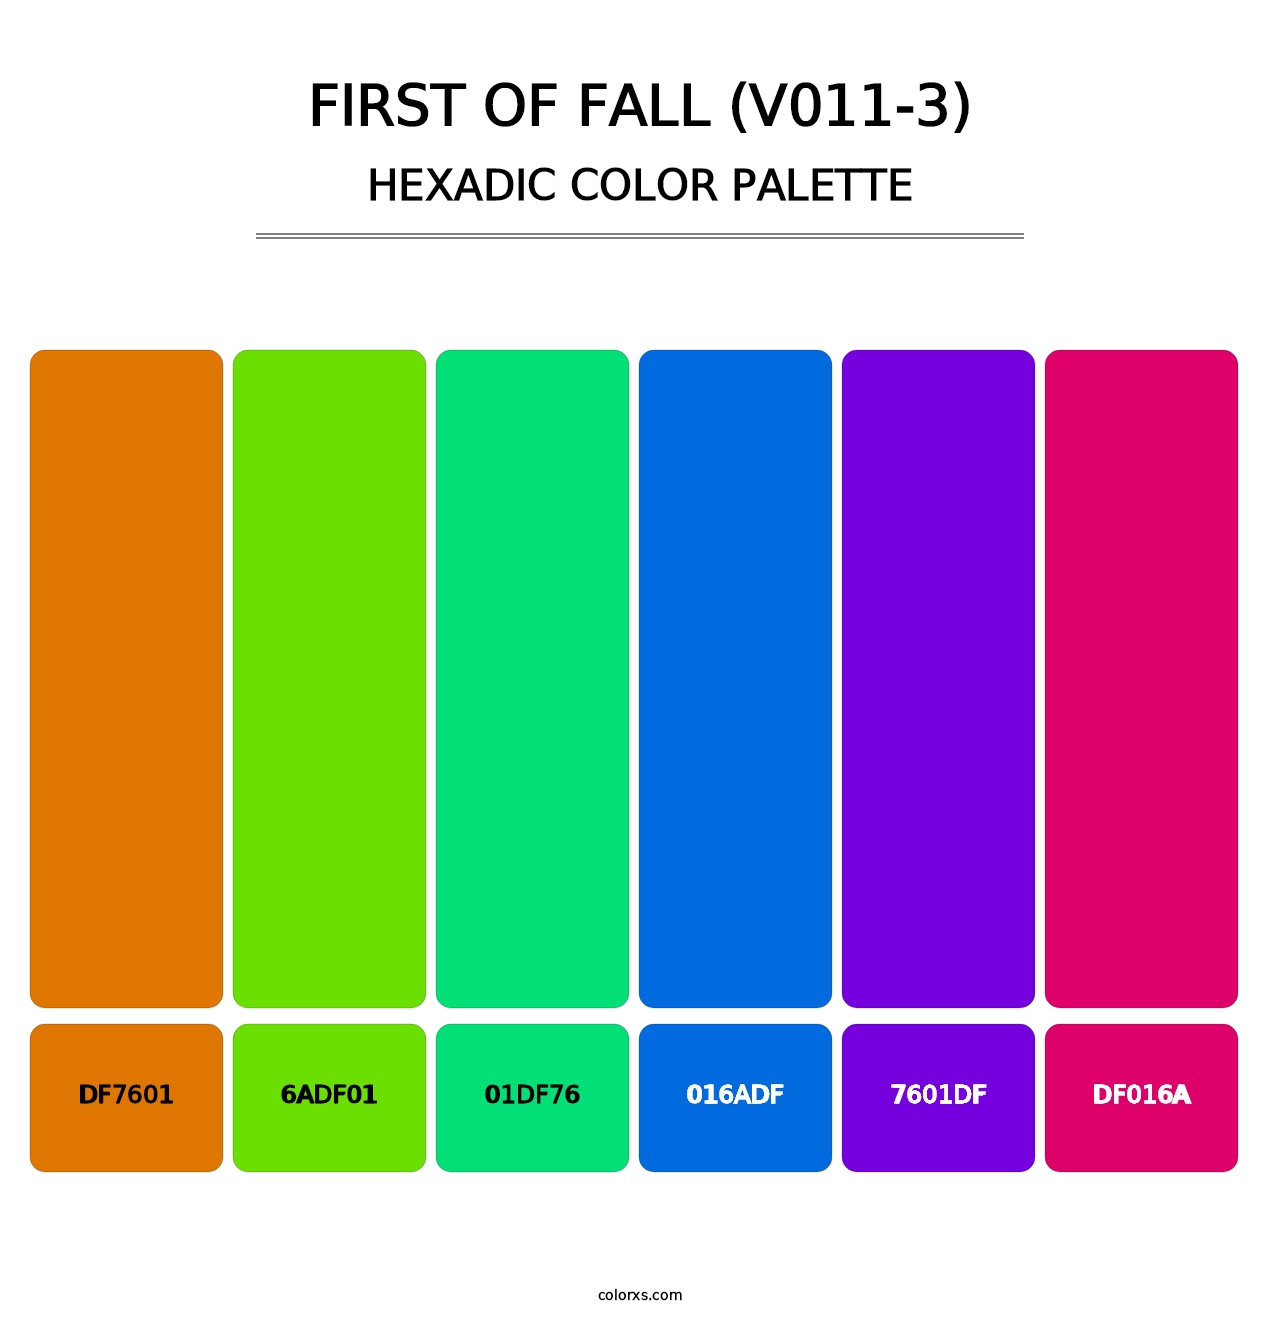 First of Fall (V011-3) - Hexadic Color Palette